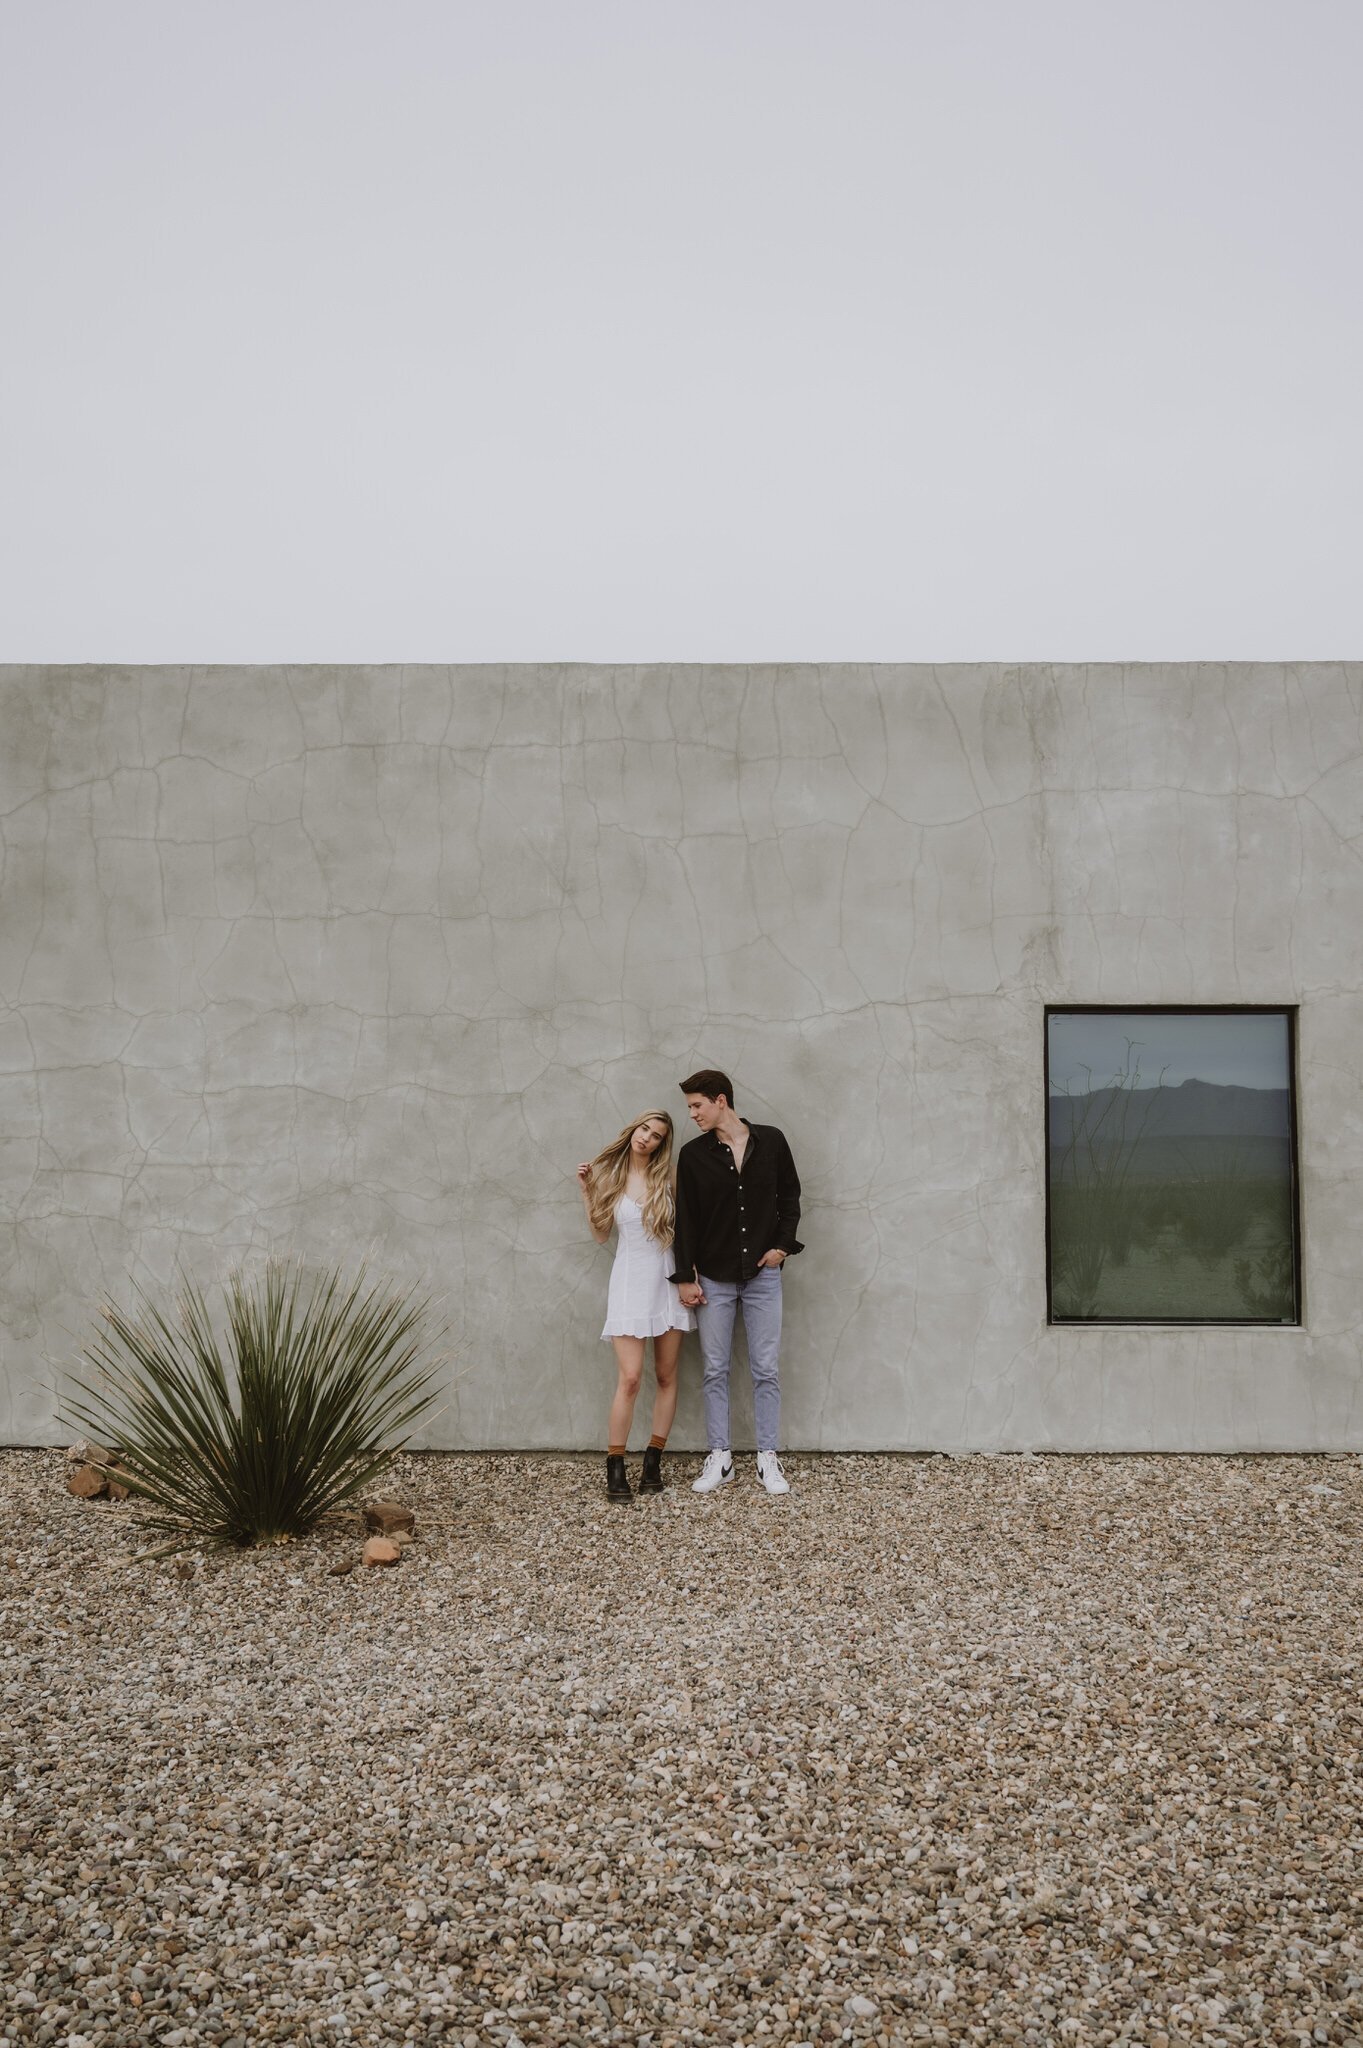 Kaylie-Sirek-Photography-Big-Bend-National-Park-Texas-Engagement-Session-Styled-You-022.jpg